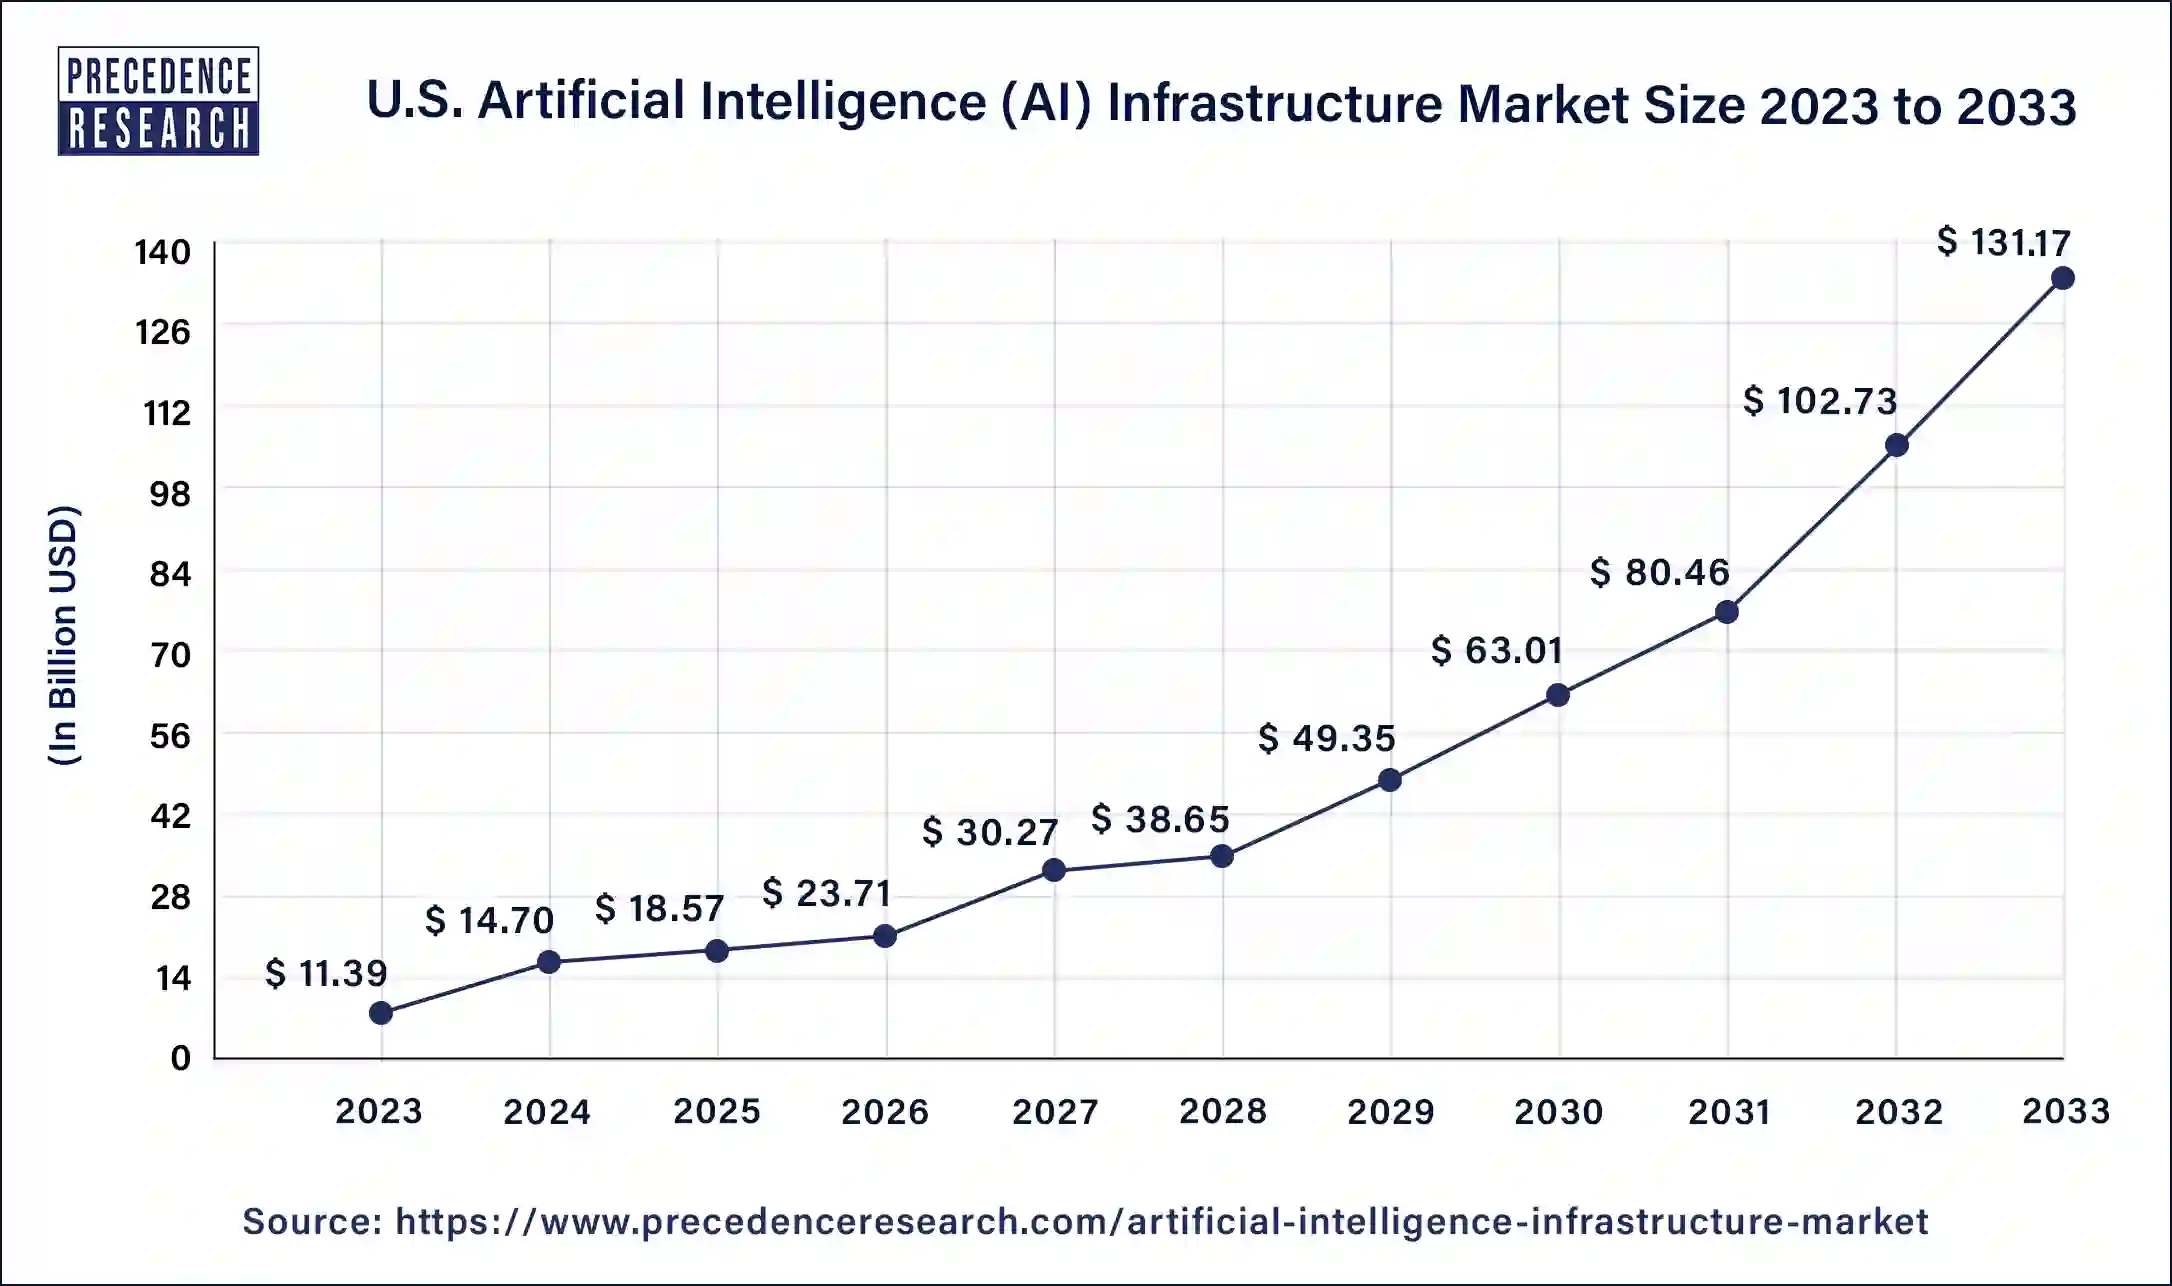 U.S. Artificial Intelligence (AI) Infrastructure Market Size 2024 to 2033